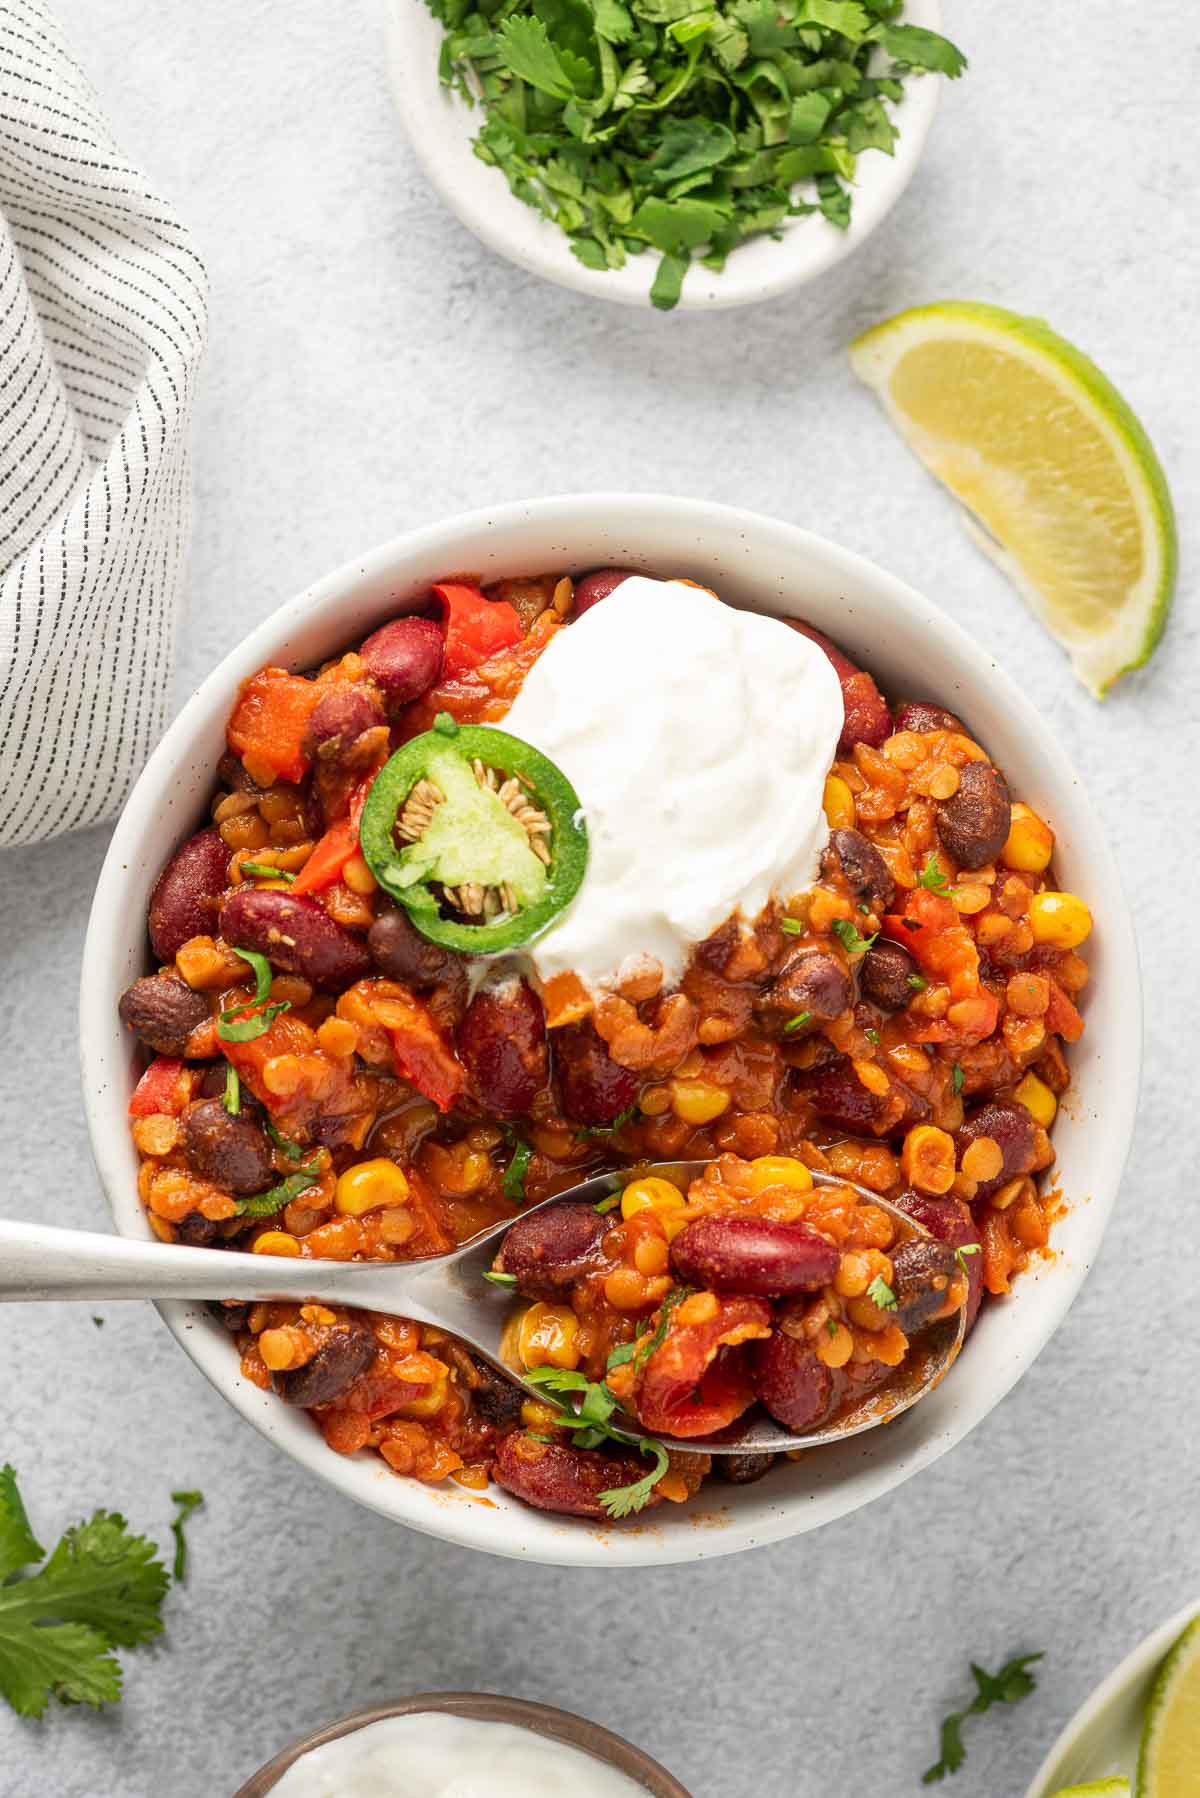 Bowl of red lentil chili with spoon and sour cream.